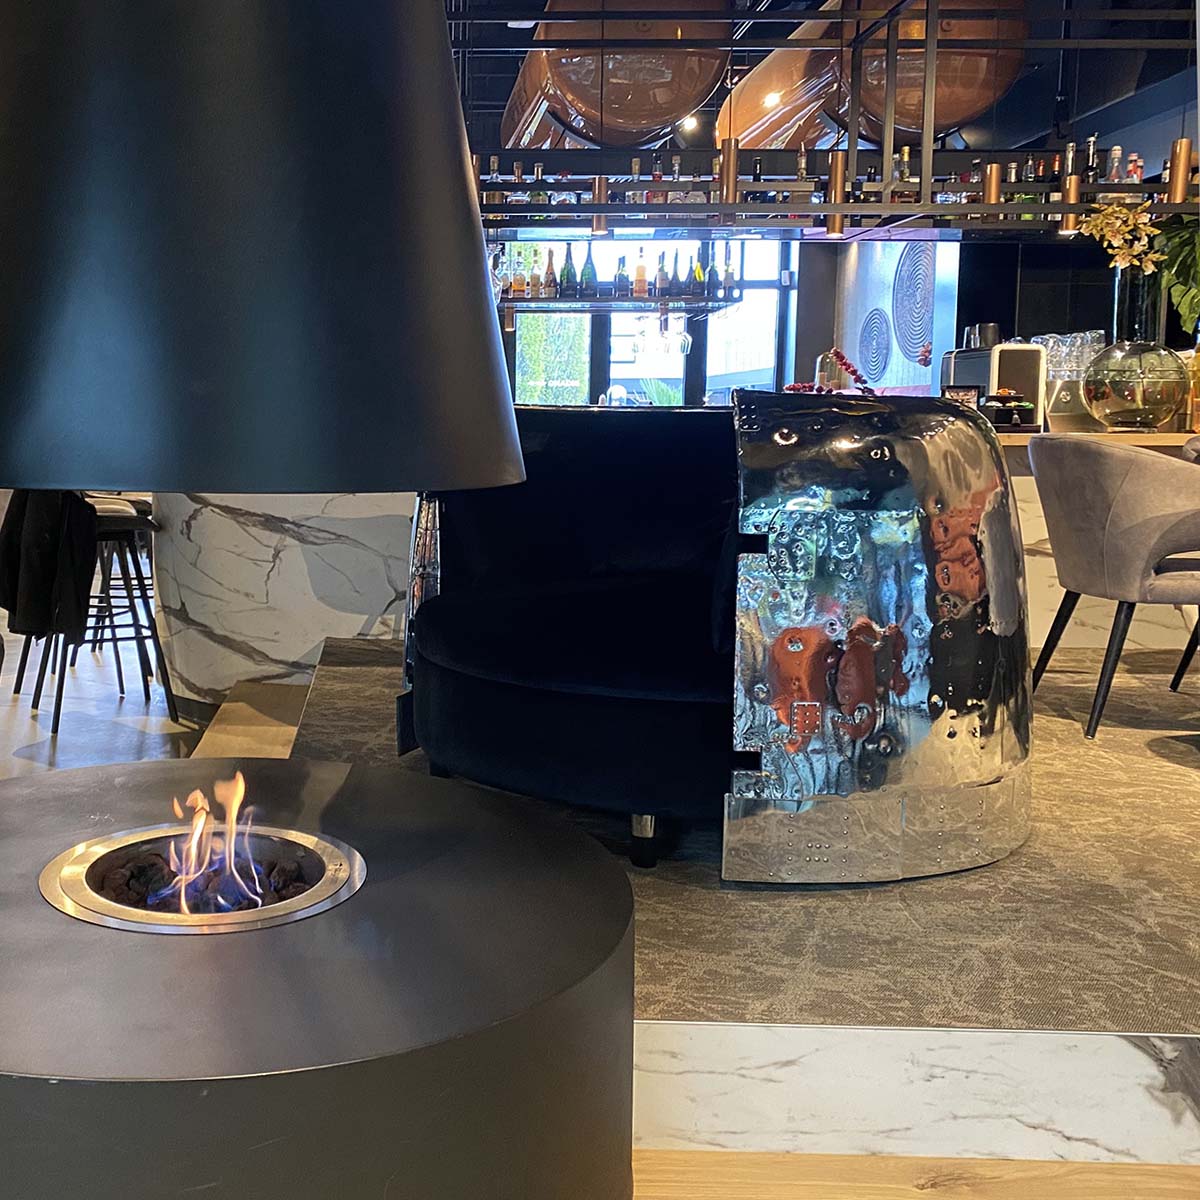 DC-3 Dakota engine cowling love seat next to a fire place in a restaurant.